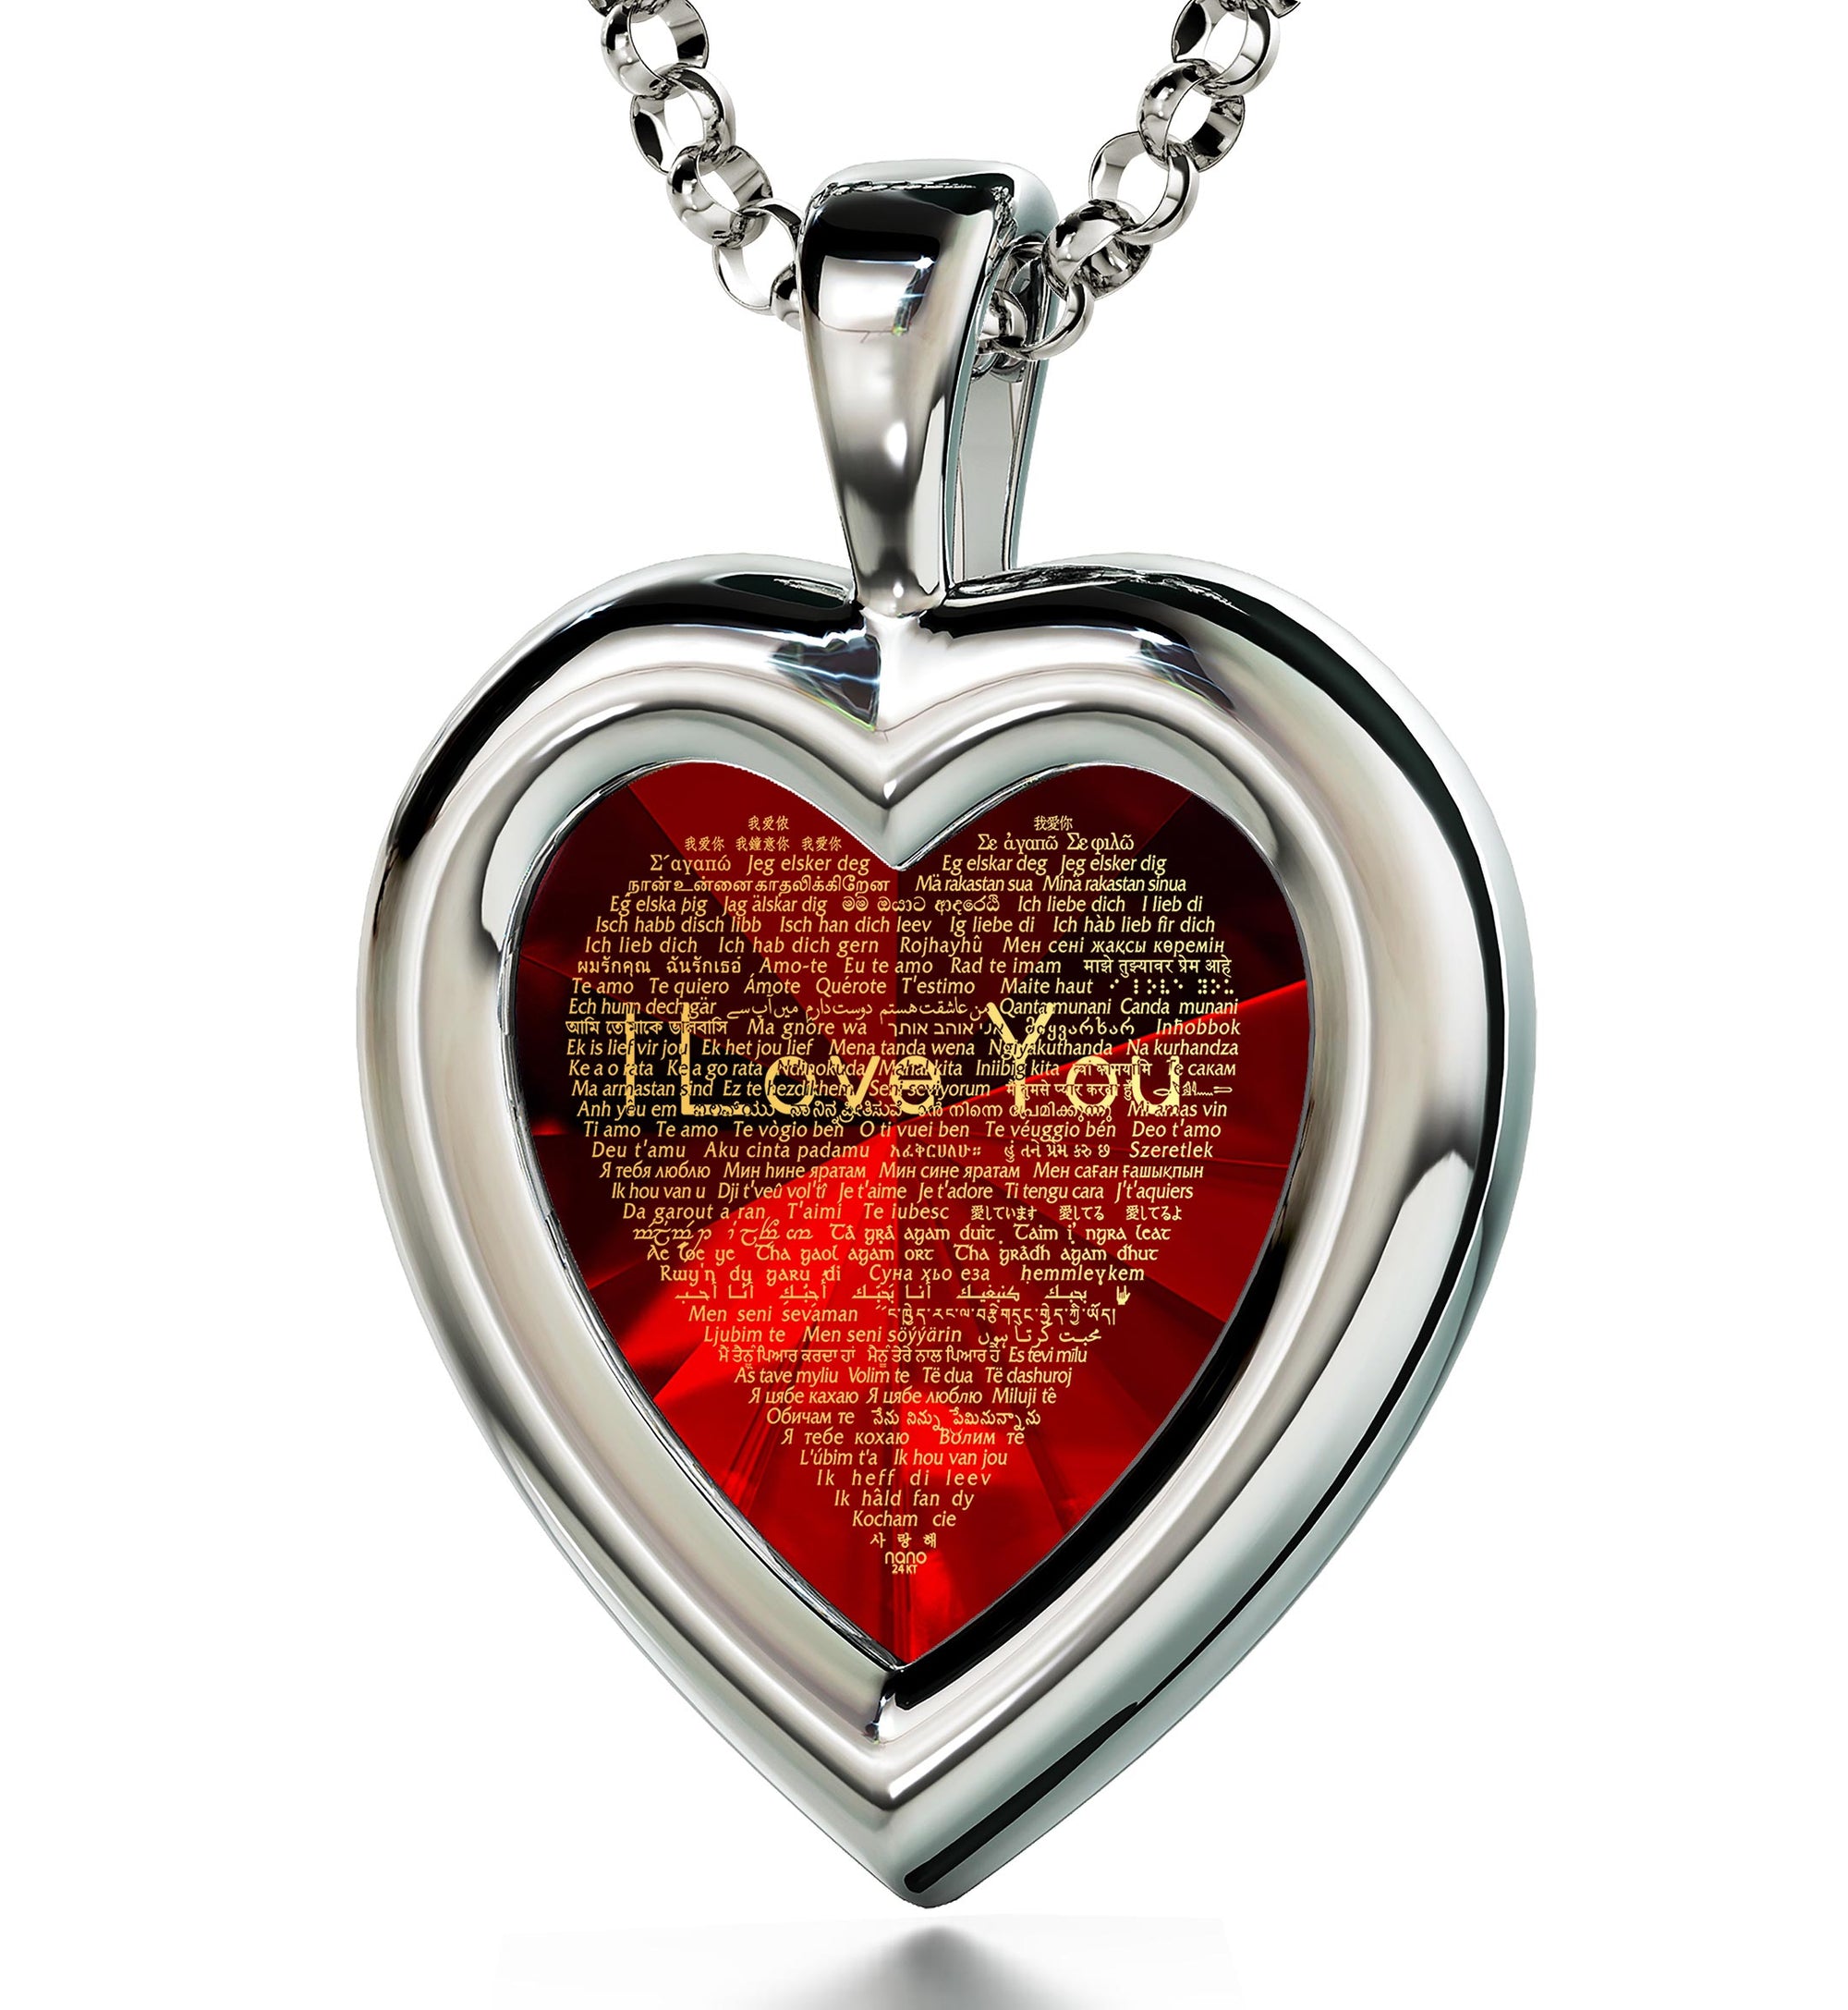 I Love You Heart Necklace in 120 Languages | Marriage Anniversary